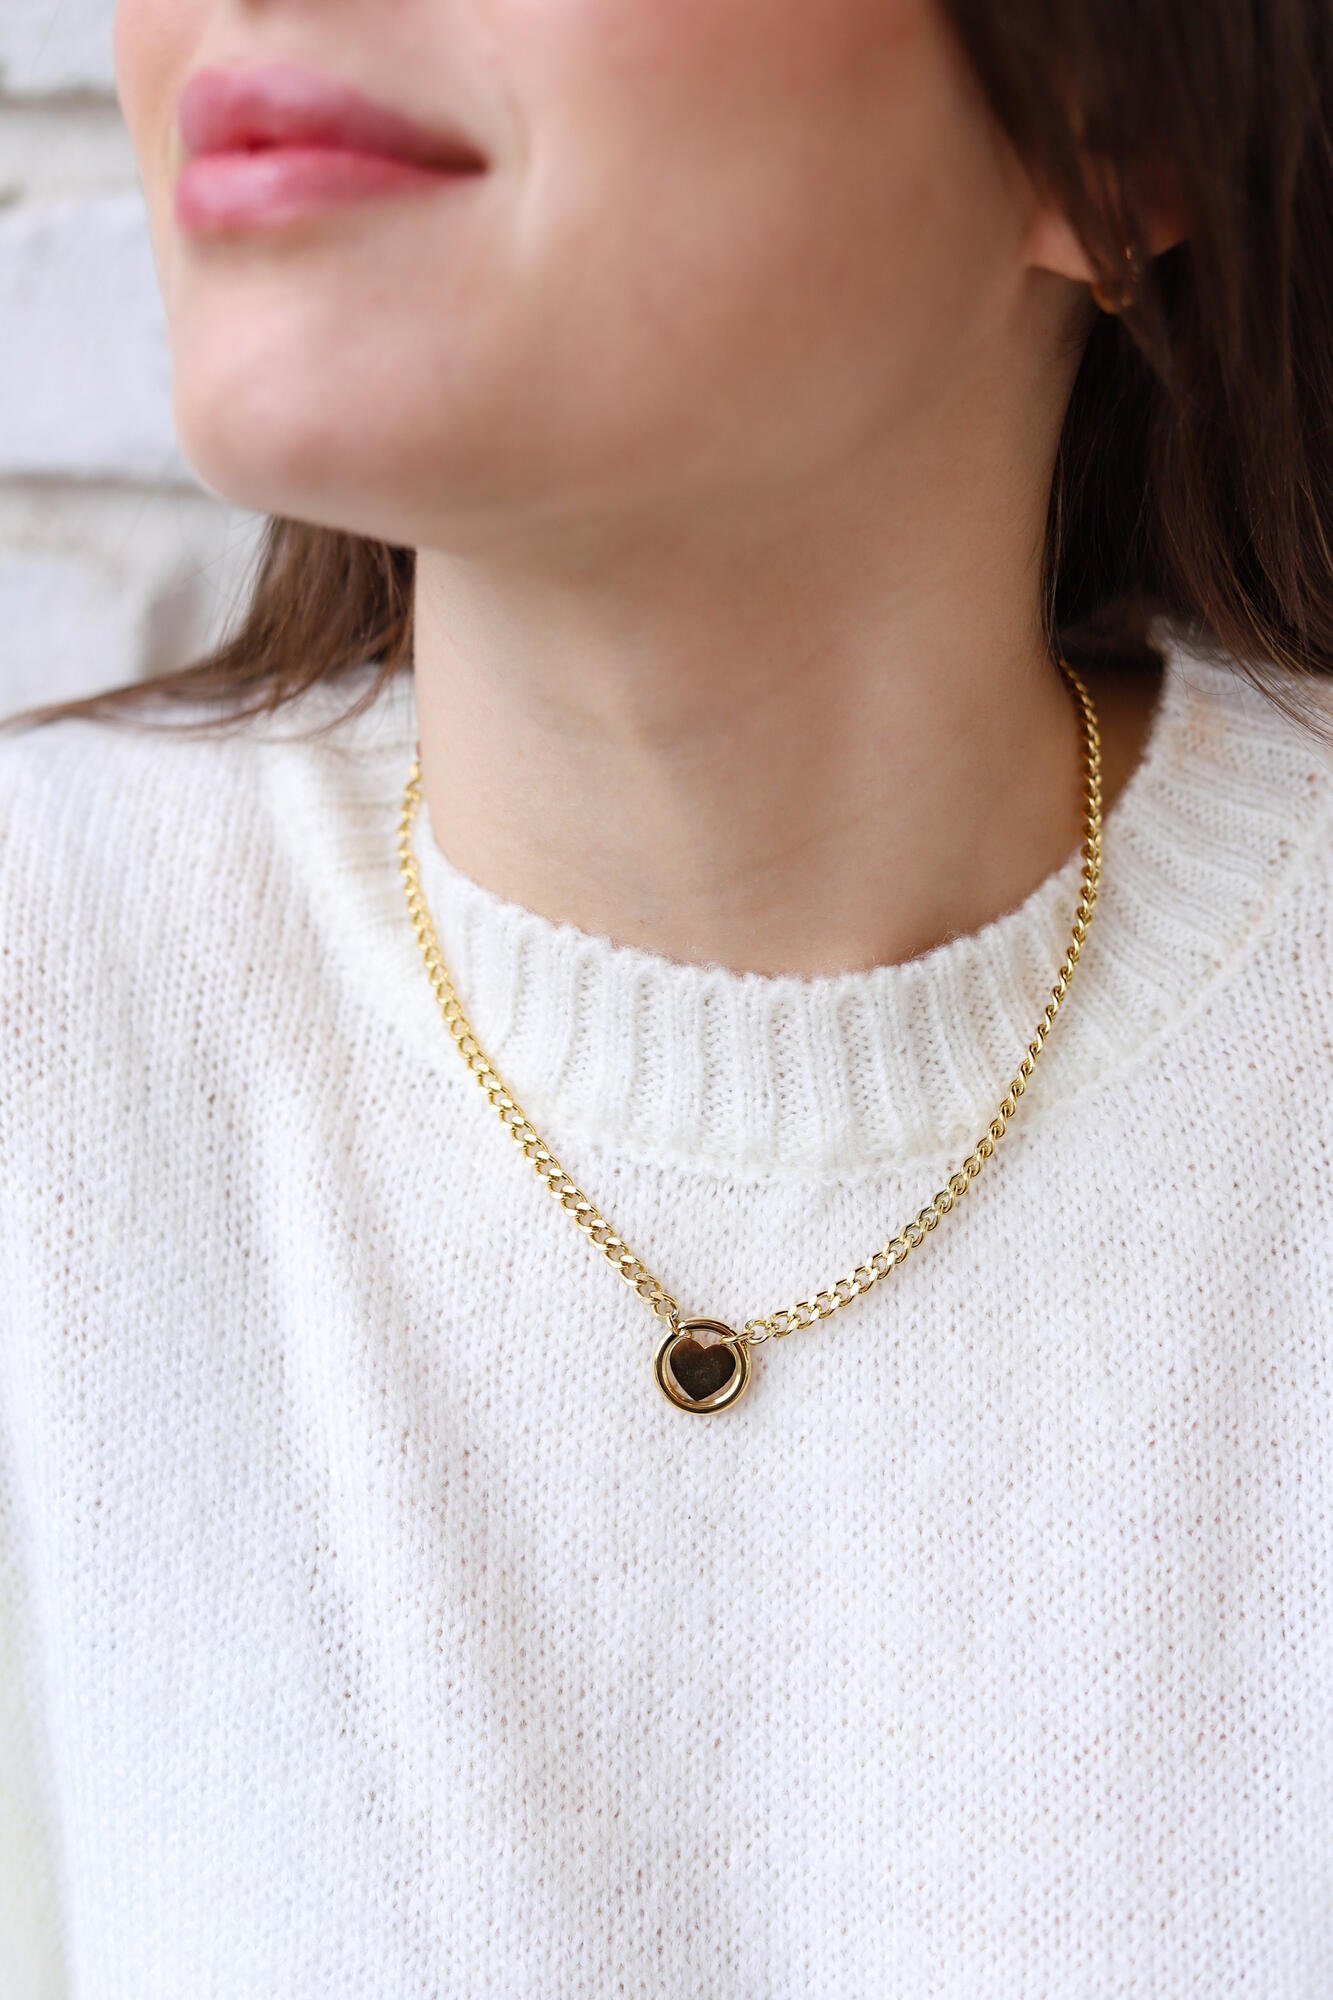 Hearted gold necklace